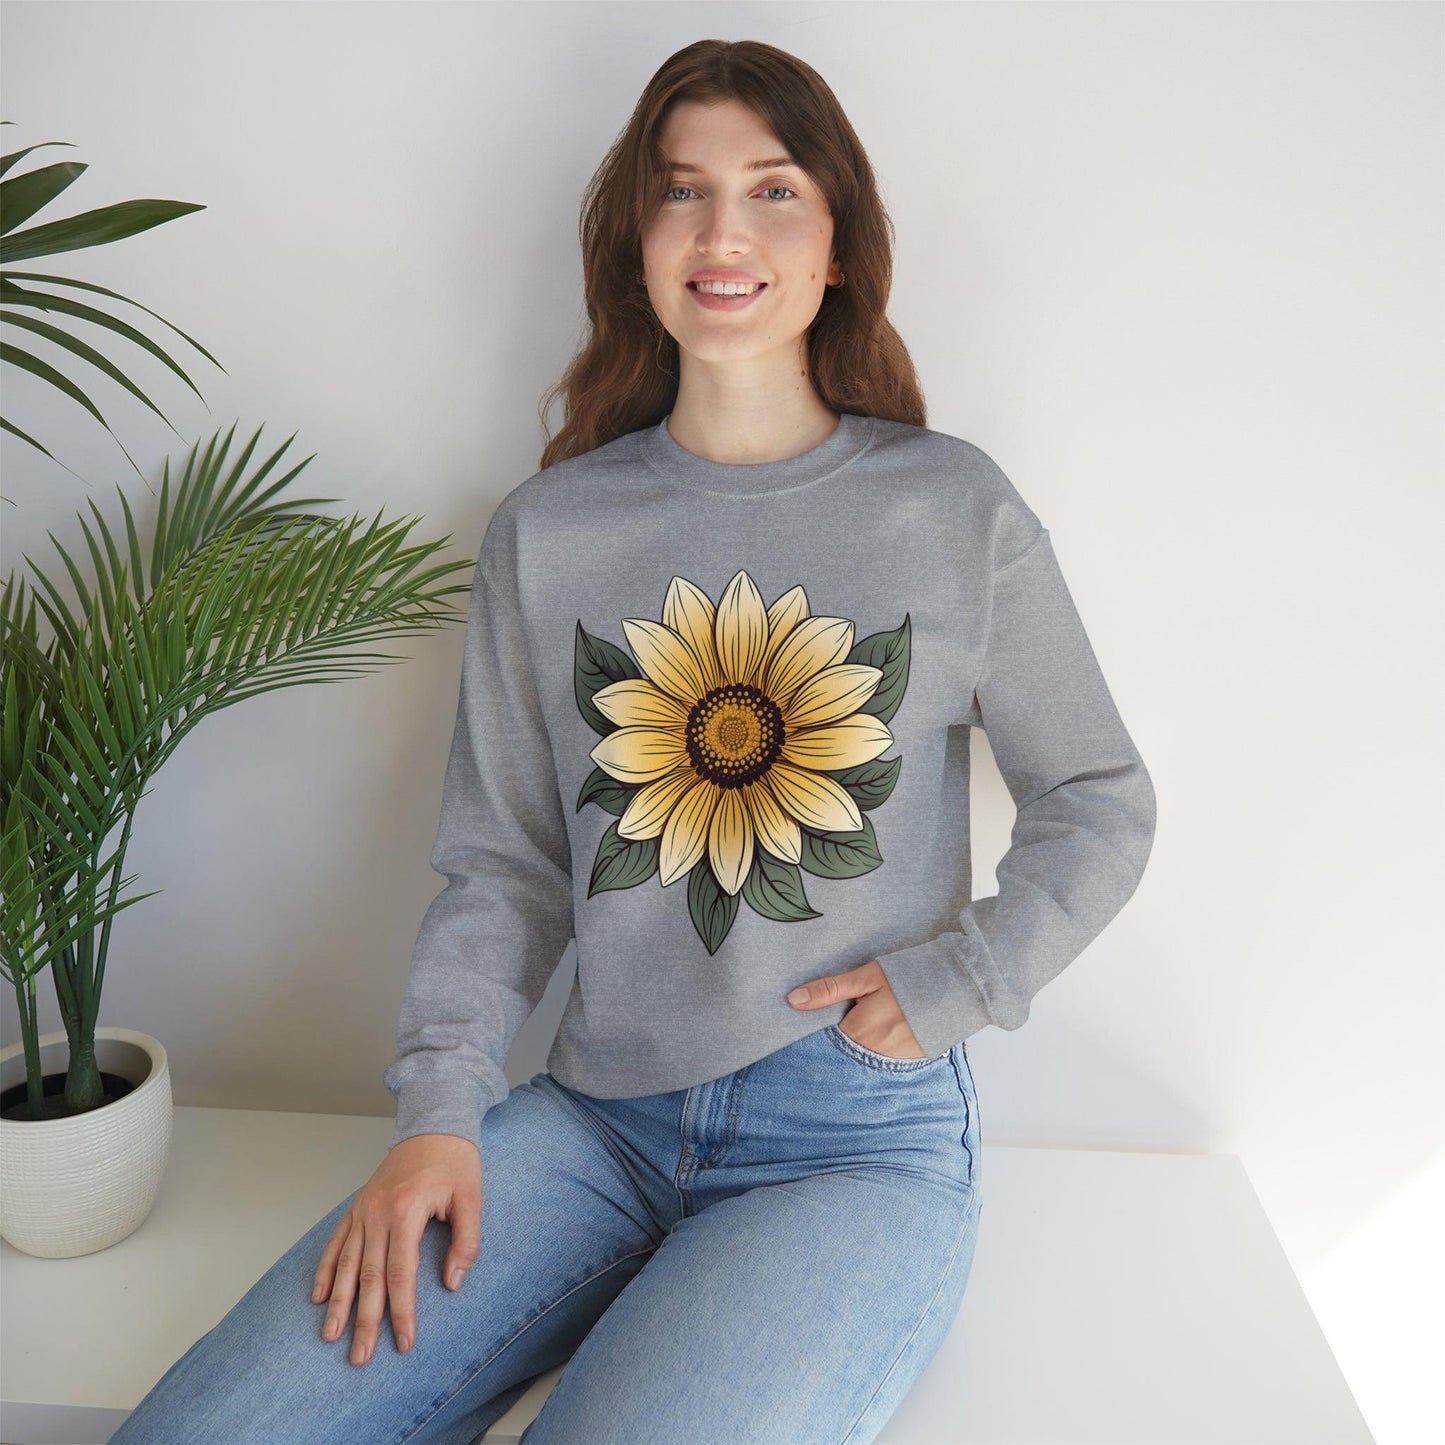 Flower Sweatshirt, Floral Sweatshirt Flower Sweatshirt Flower Sweater, Flower Shirt, Floral Print, Flower TShirt, Perfect Mothers Day Gift - Giftsmojo